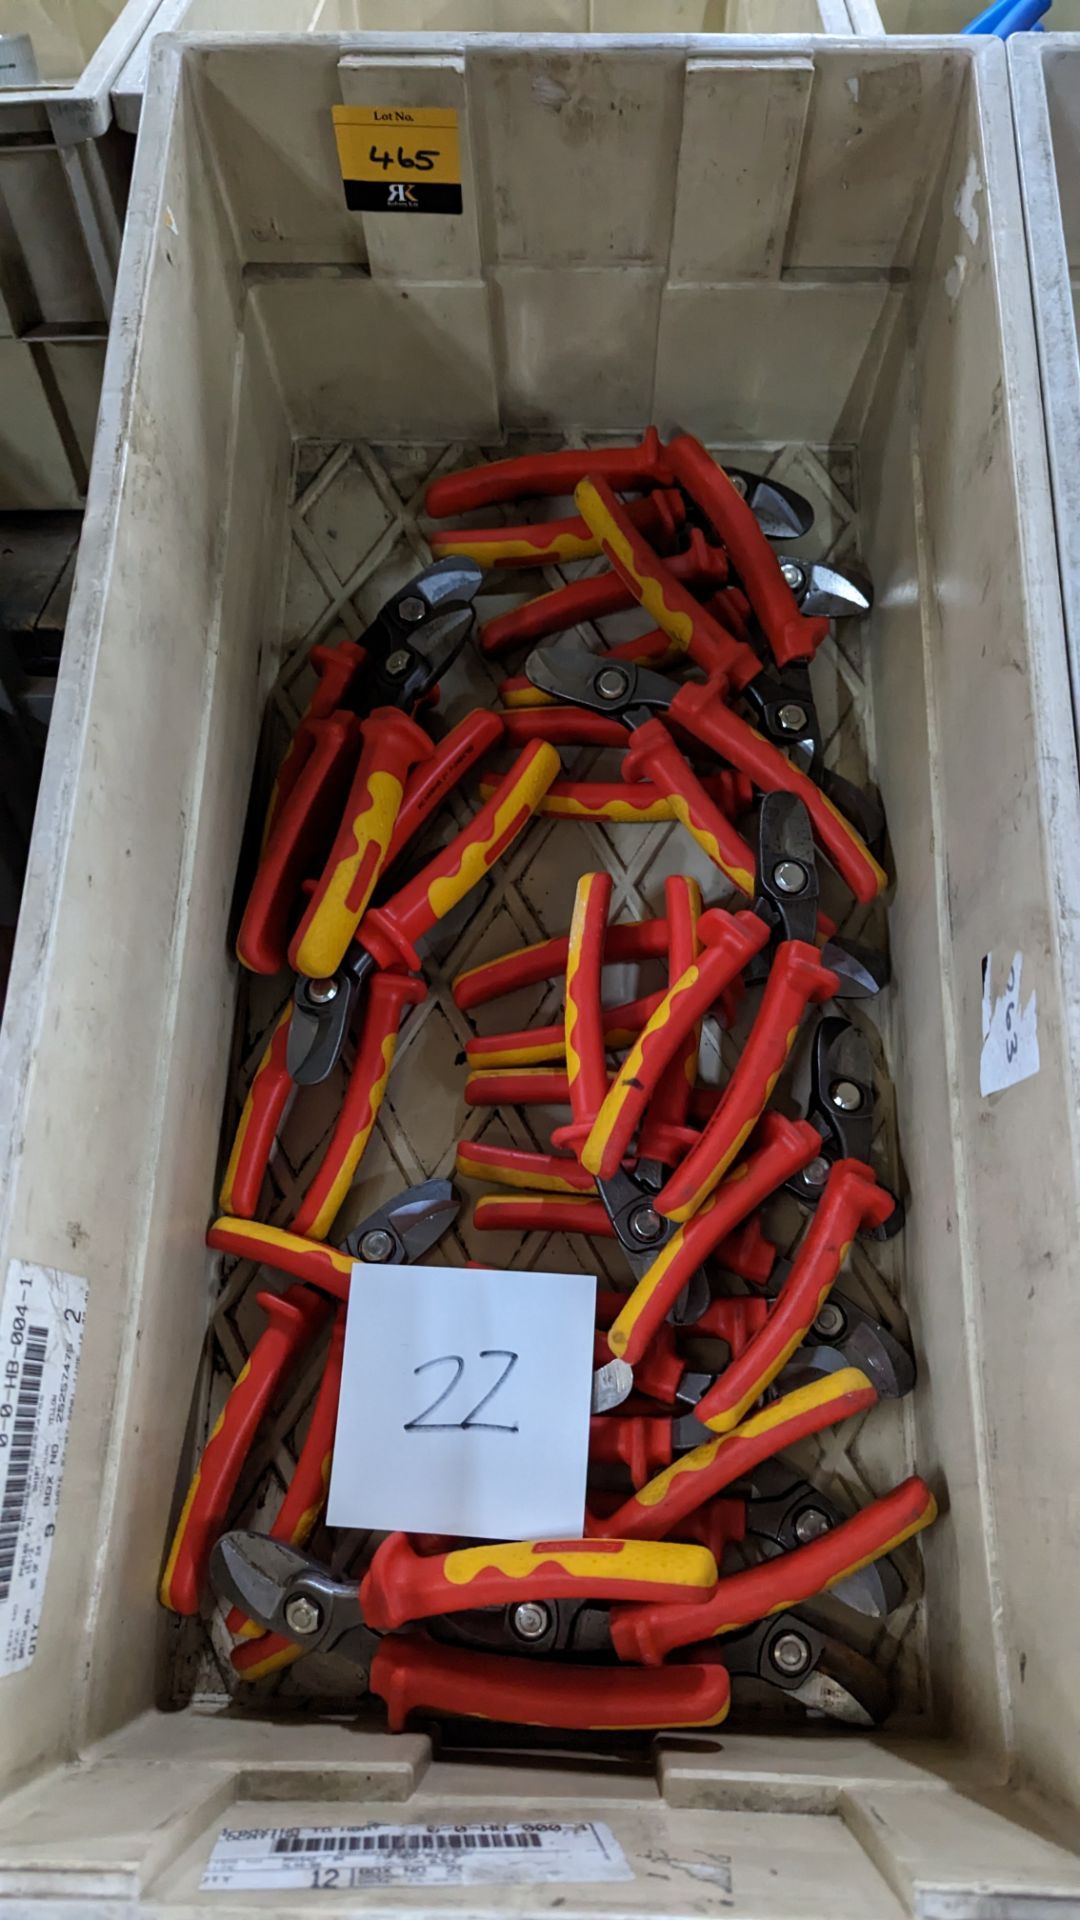 22 off angled cutters, insulated